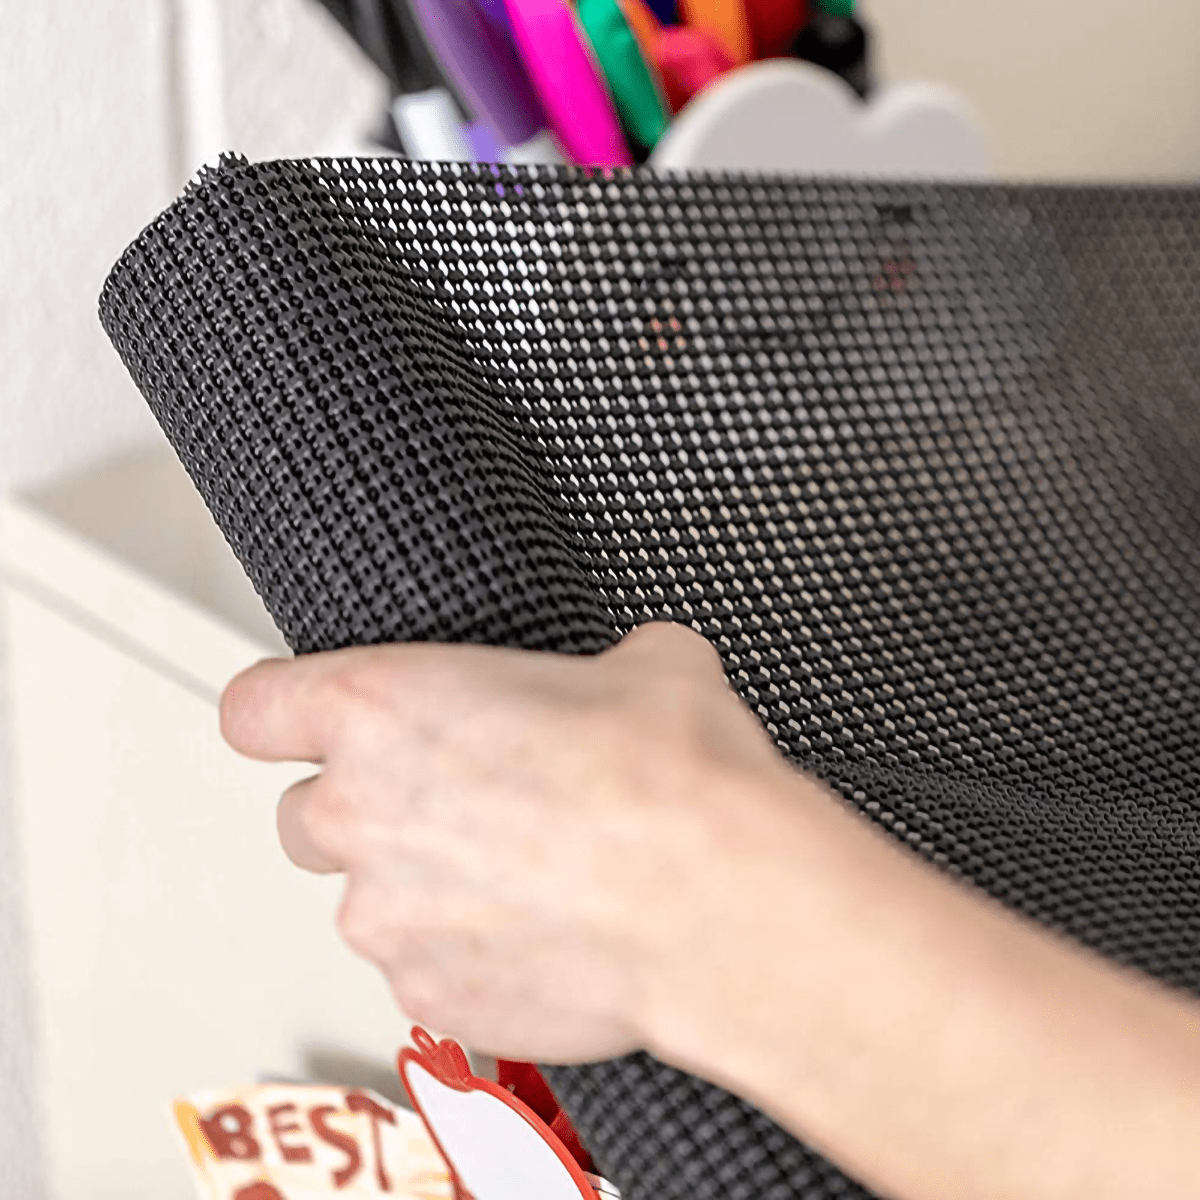 7 of the Best Shelf Liner Options for 2023